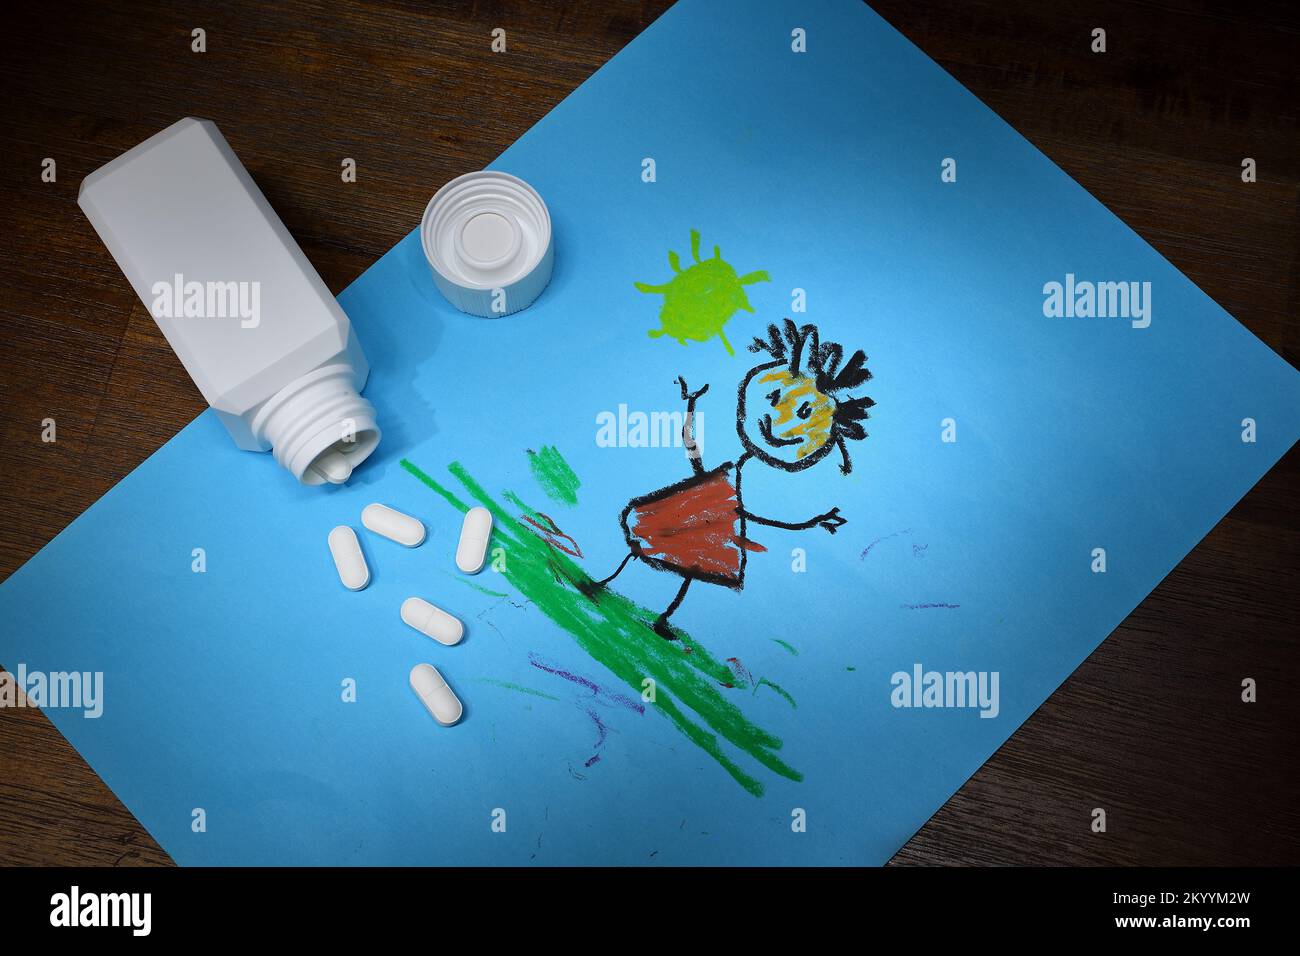 A scene of an open container of medication on a child’s artwork illustrating the dangers of unattended drugs in the presence of young children Stock Photo